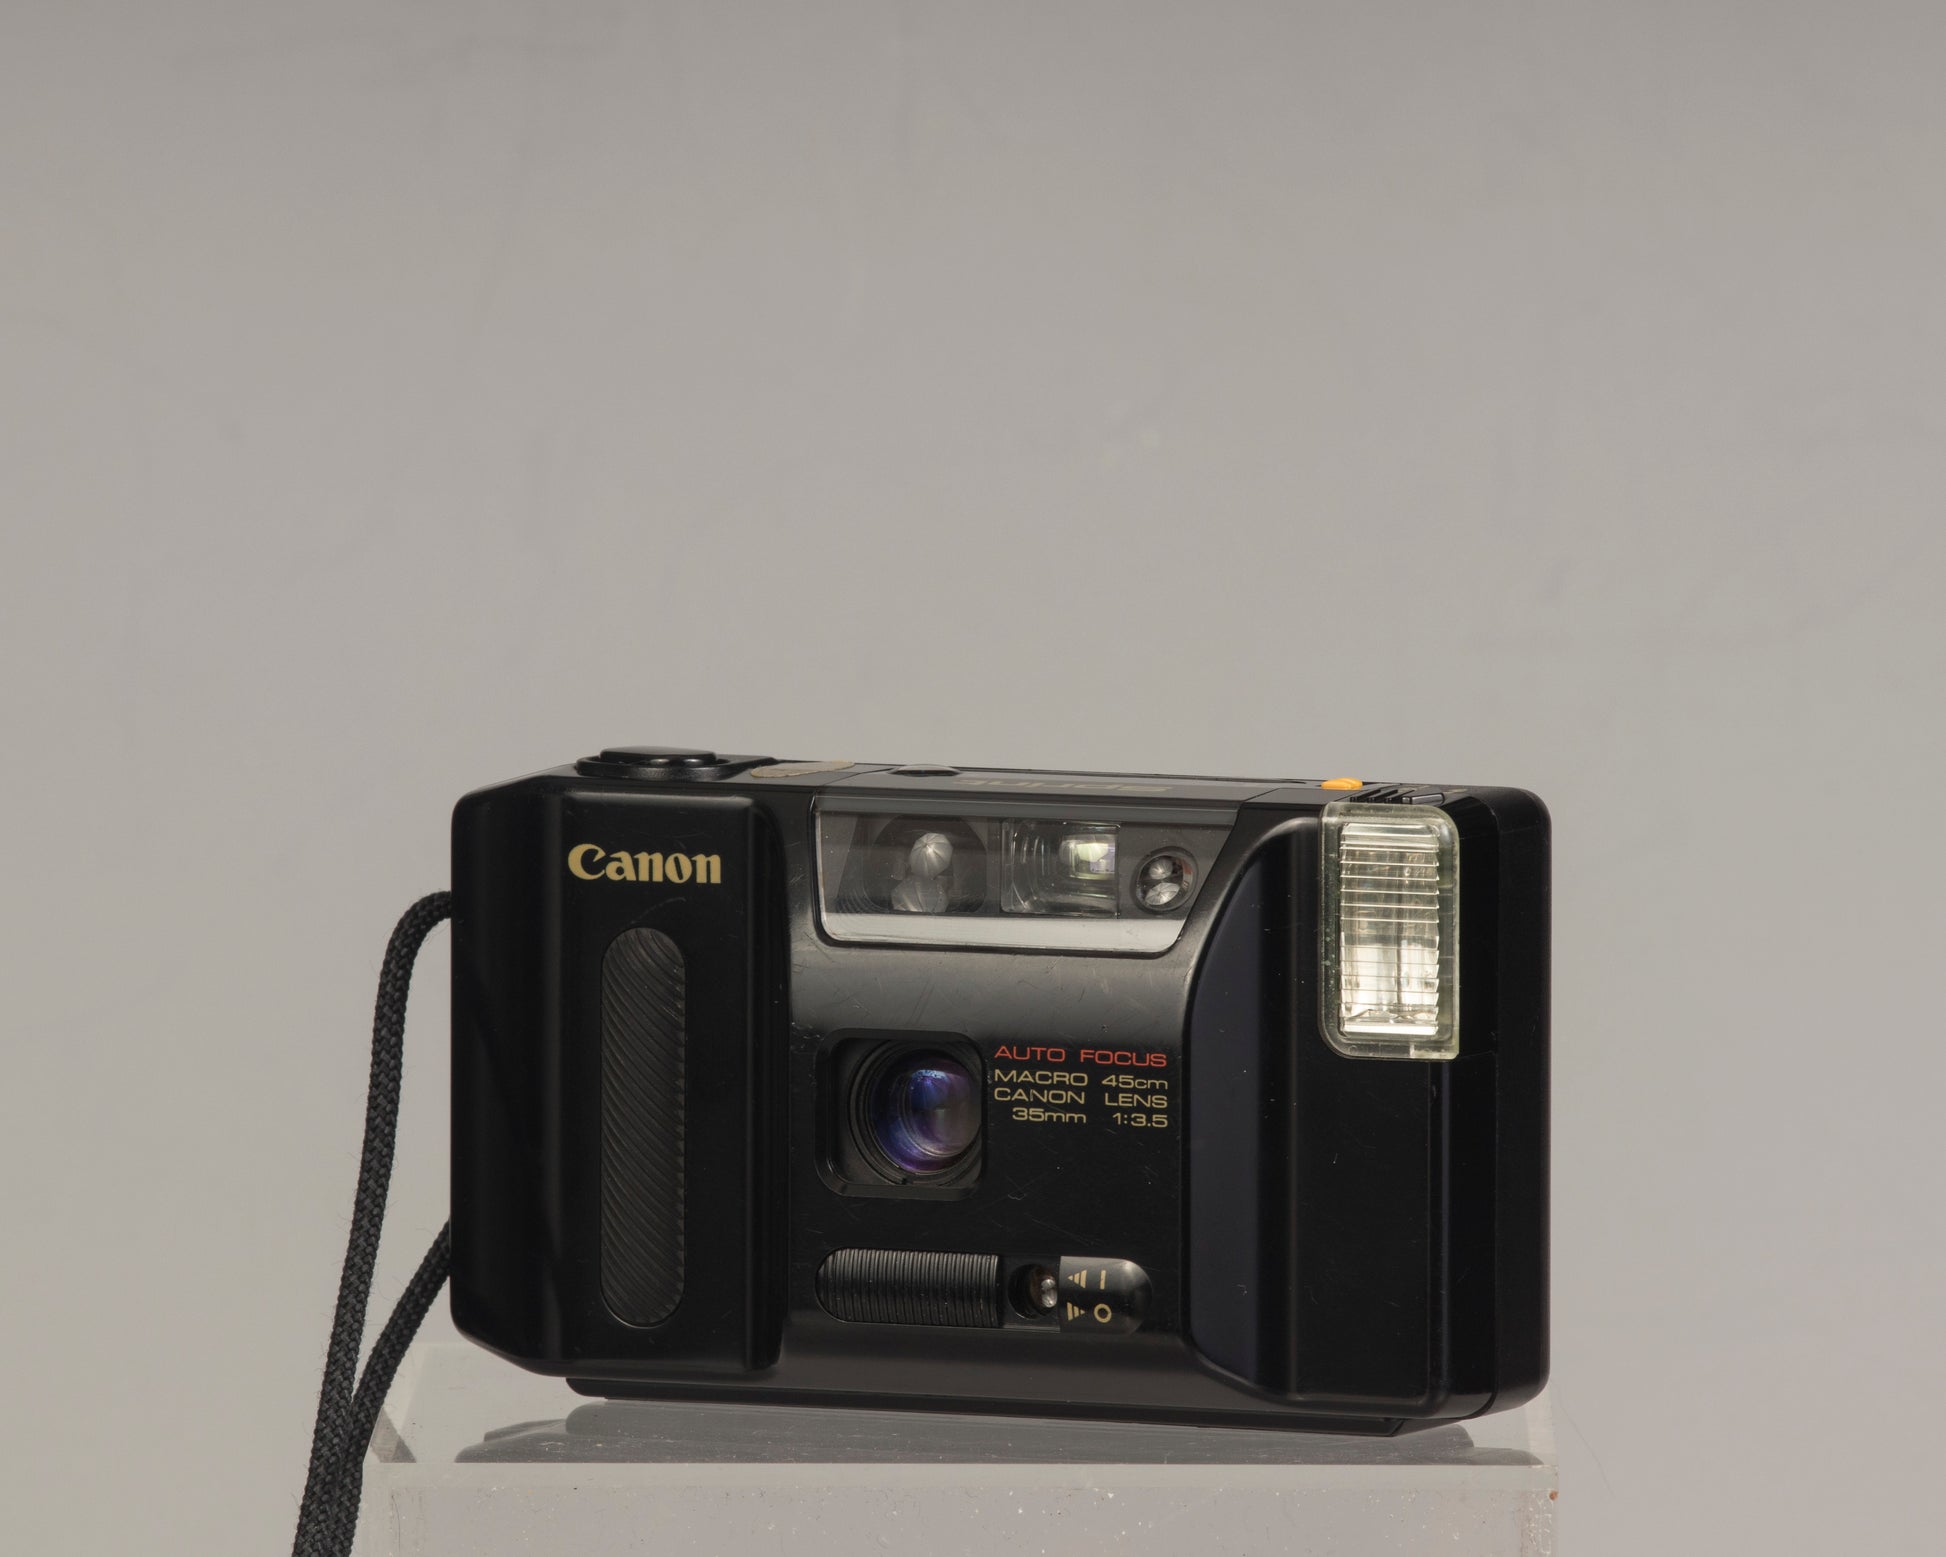 The Canon Sprint is an auto focus 35mm film point-and-shoot camera featuring a fixed 35mm f3.5 lens